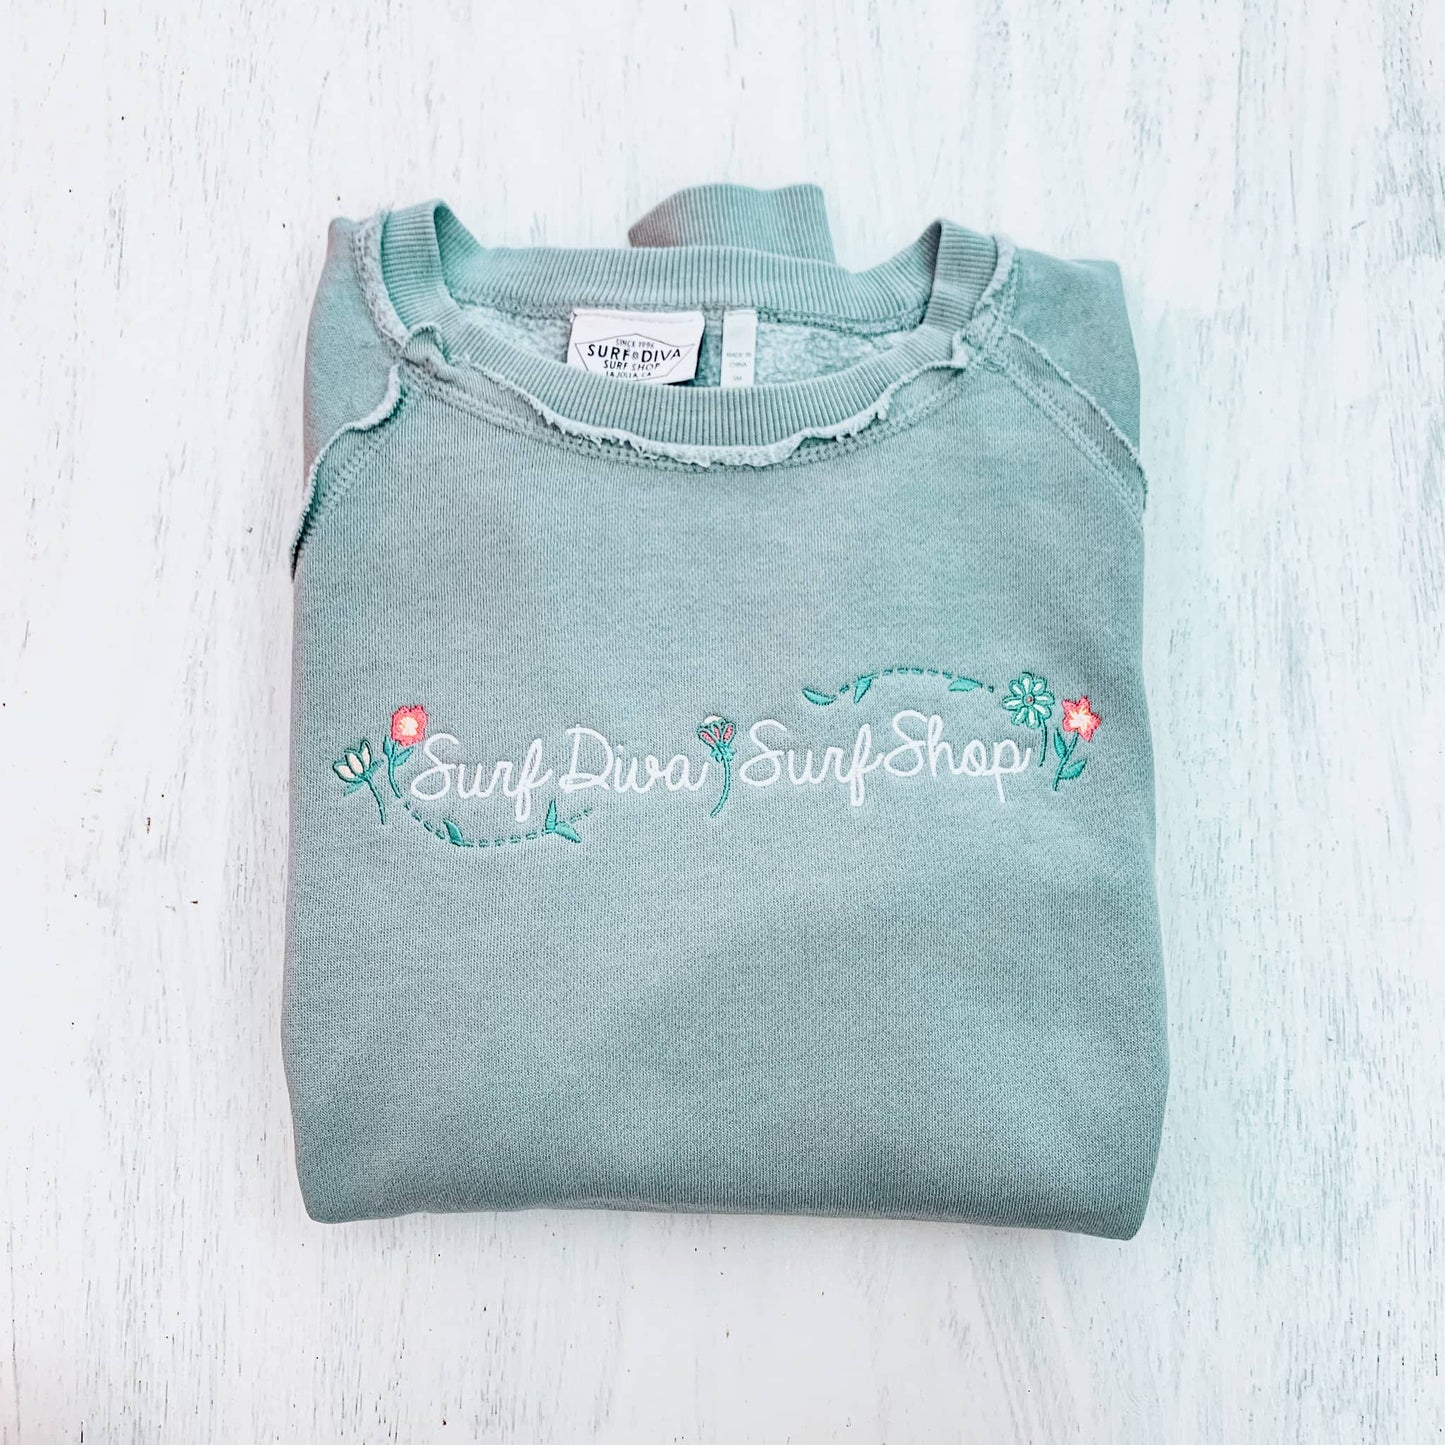 Surf Diva Surf Shop Flowerpoint Embroidery - CREW NECK PULLOVER